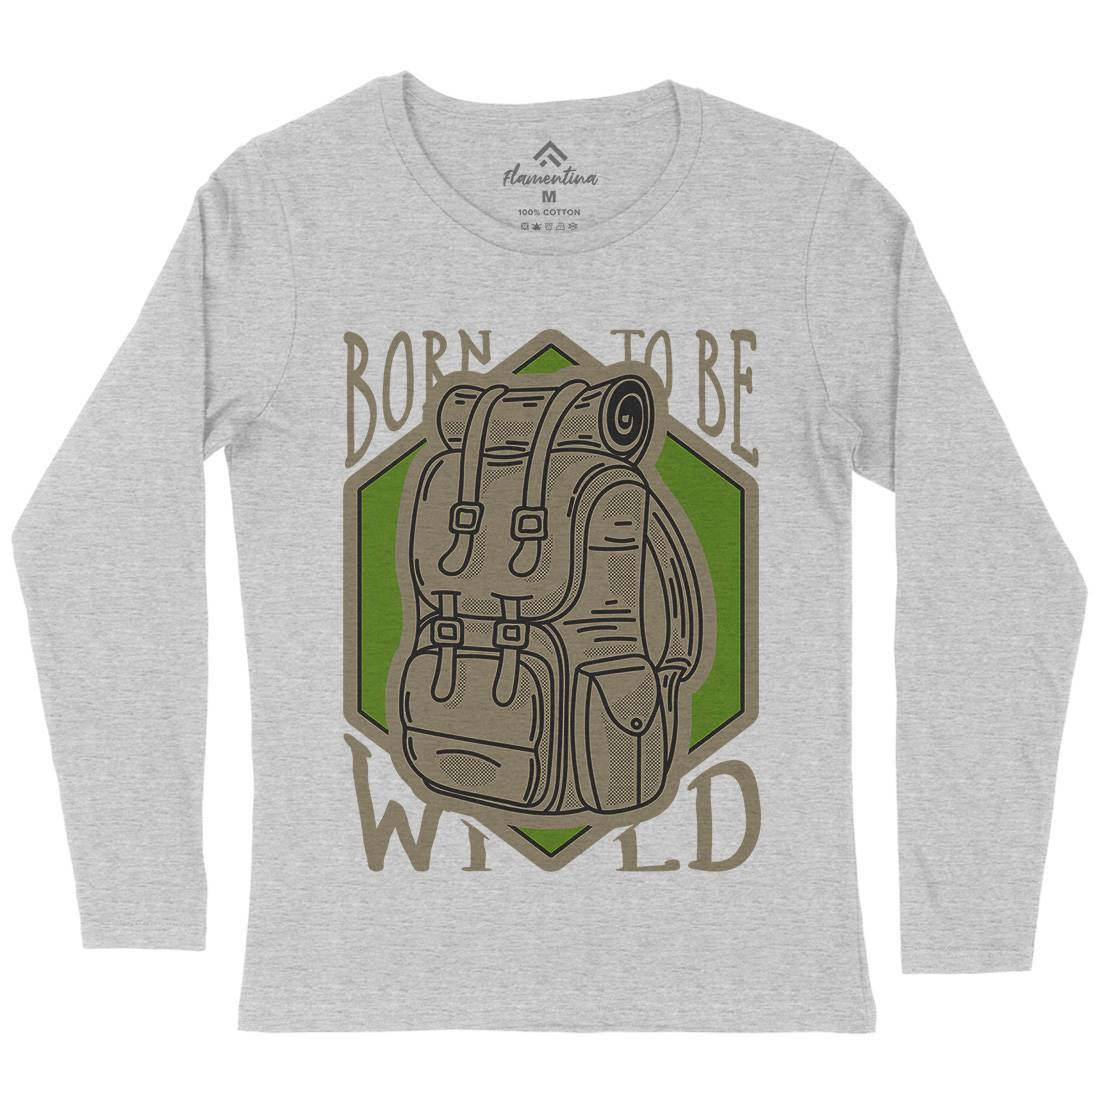 Born To Be Wild Womens Long Sleeve T-Shirt Nature D912